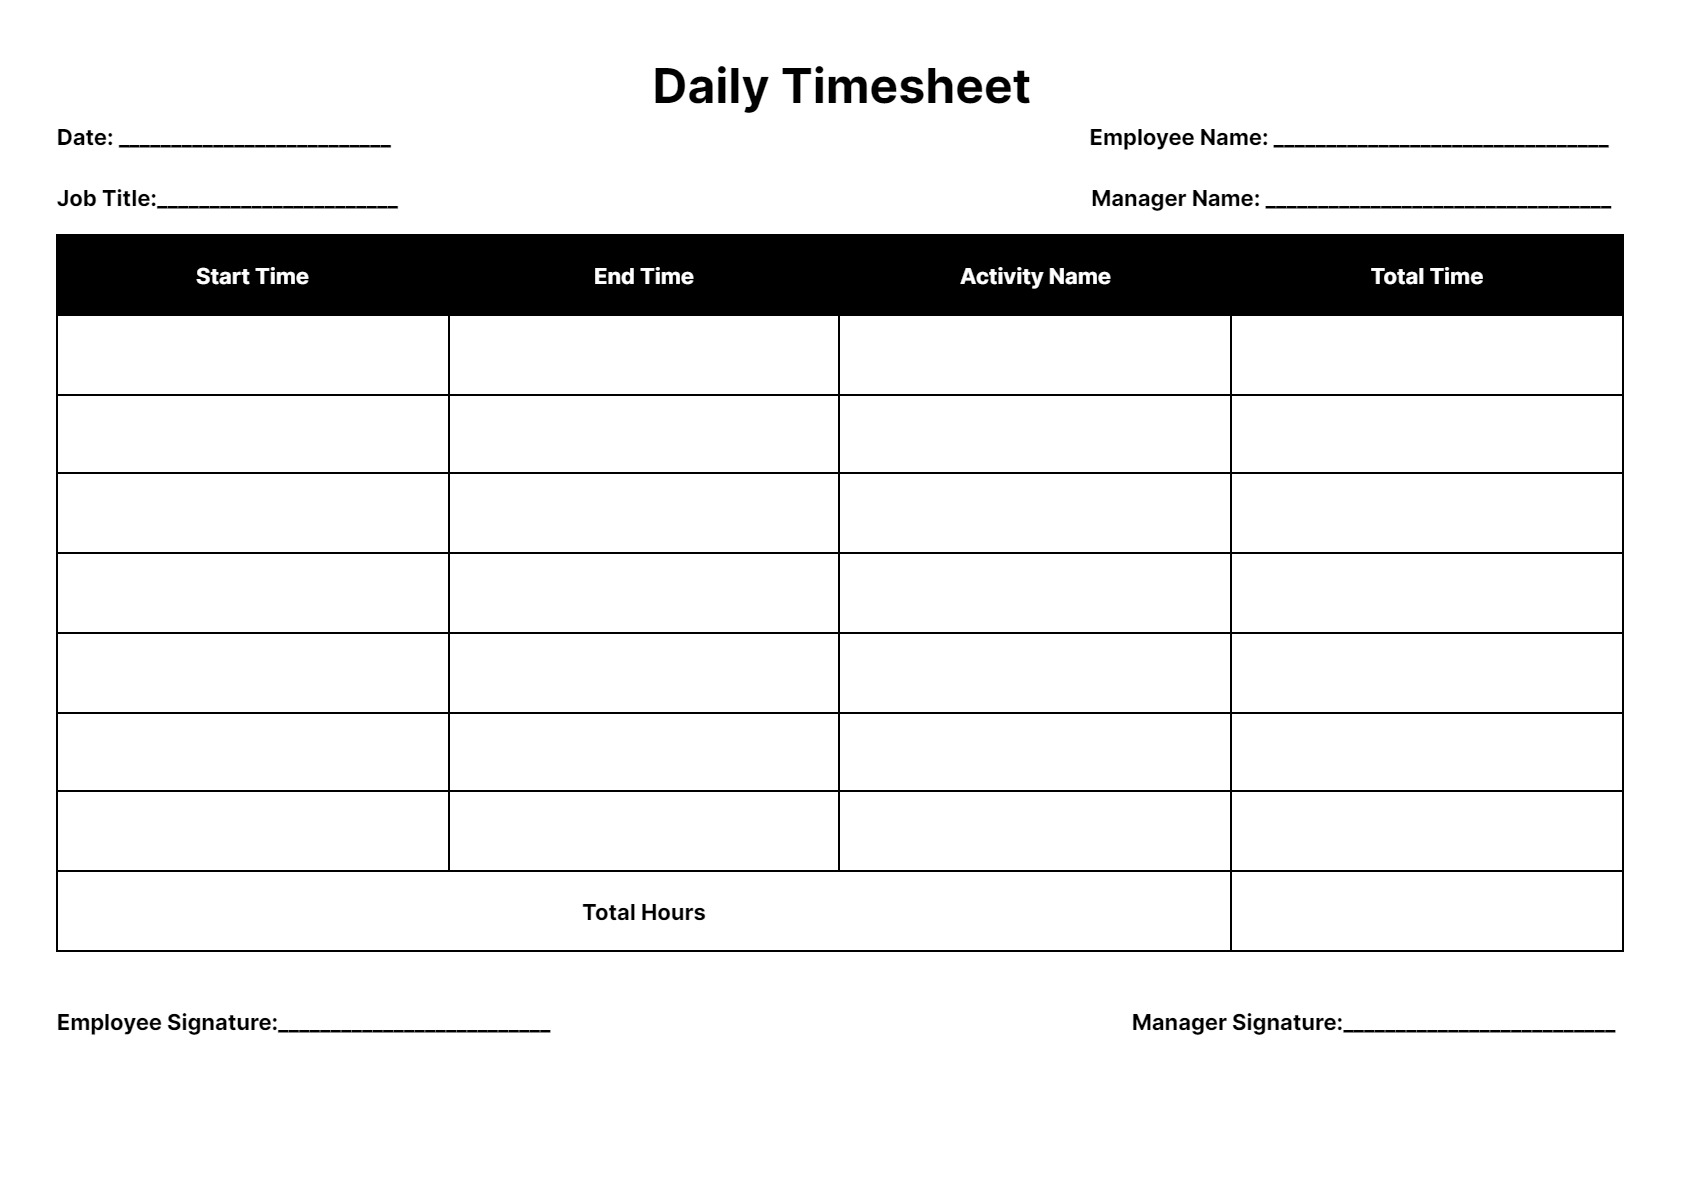 Timesheet Templates: Download Print for Free